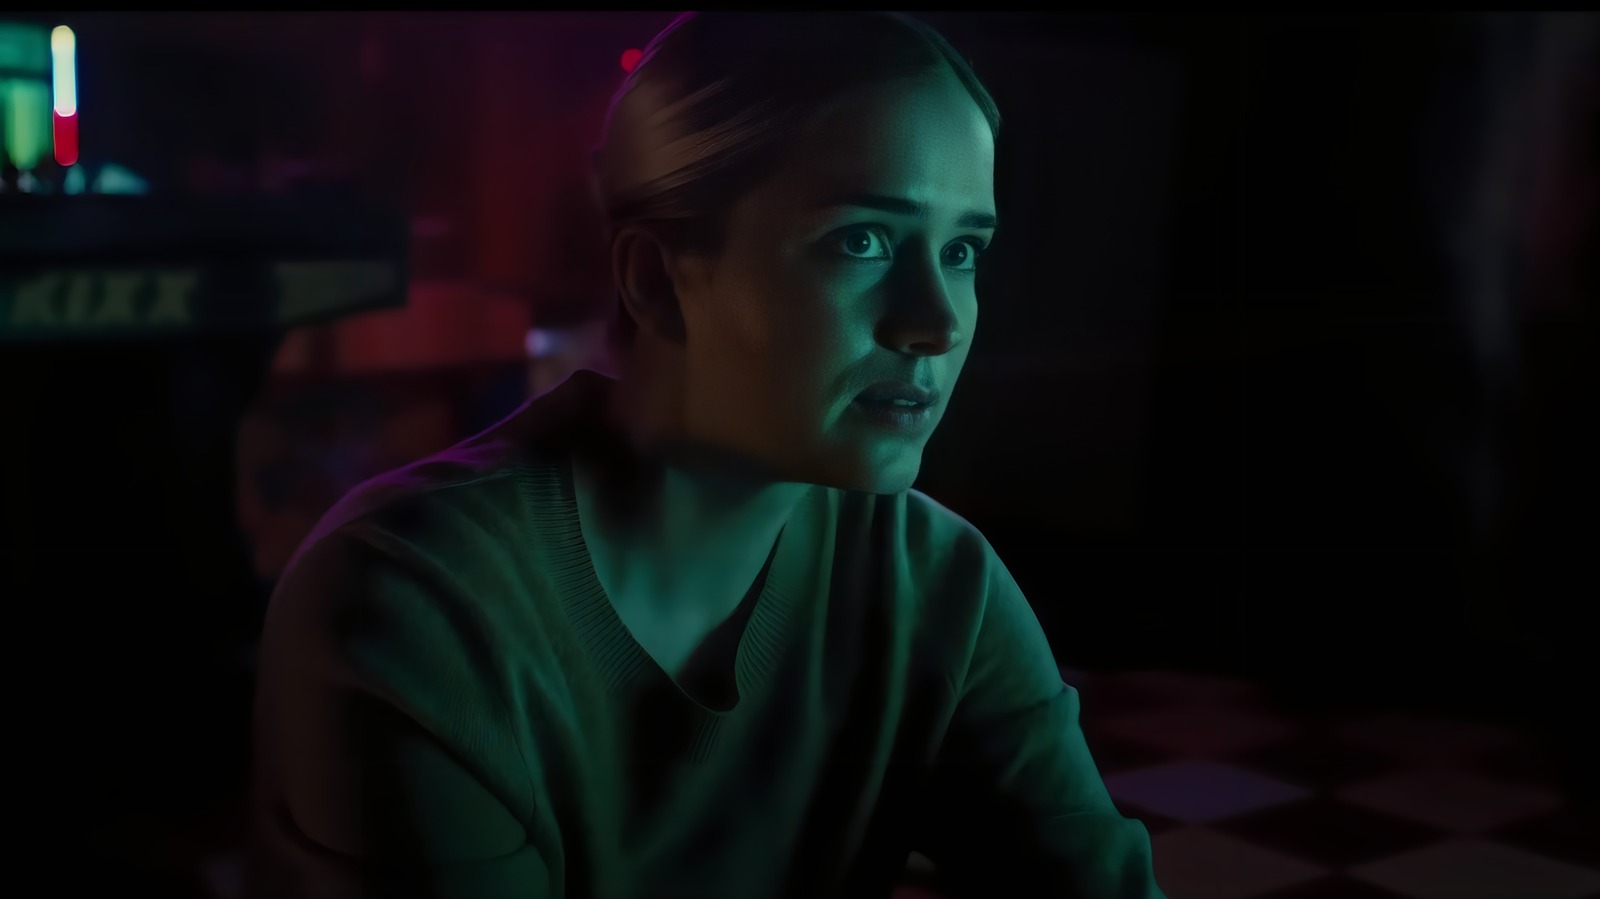 Five Nights At Freddy's: Why We Expect Elizabeth Lail's Vanessa To Be A Franchise Movie Twist